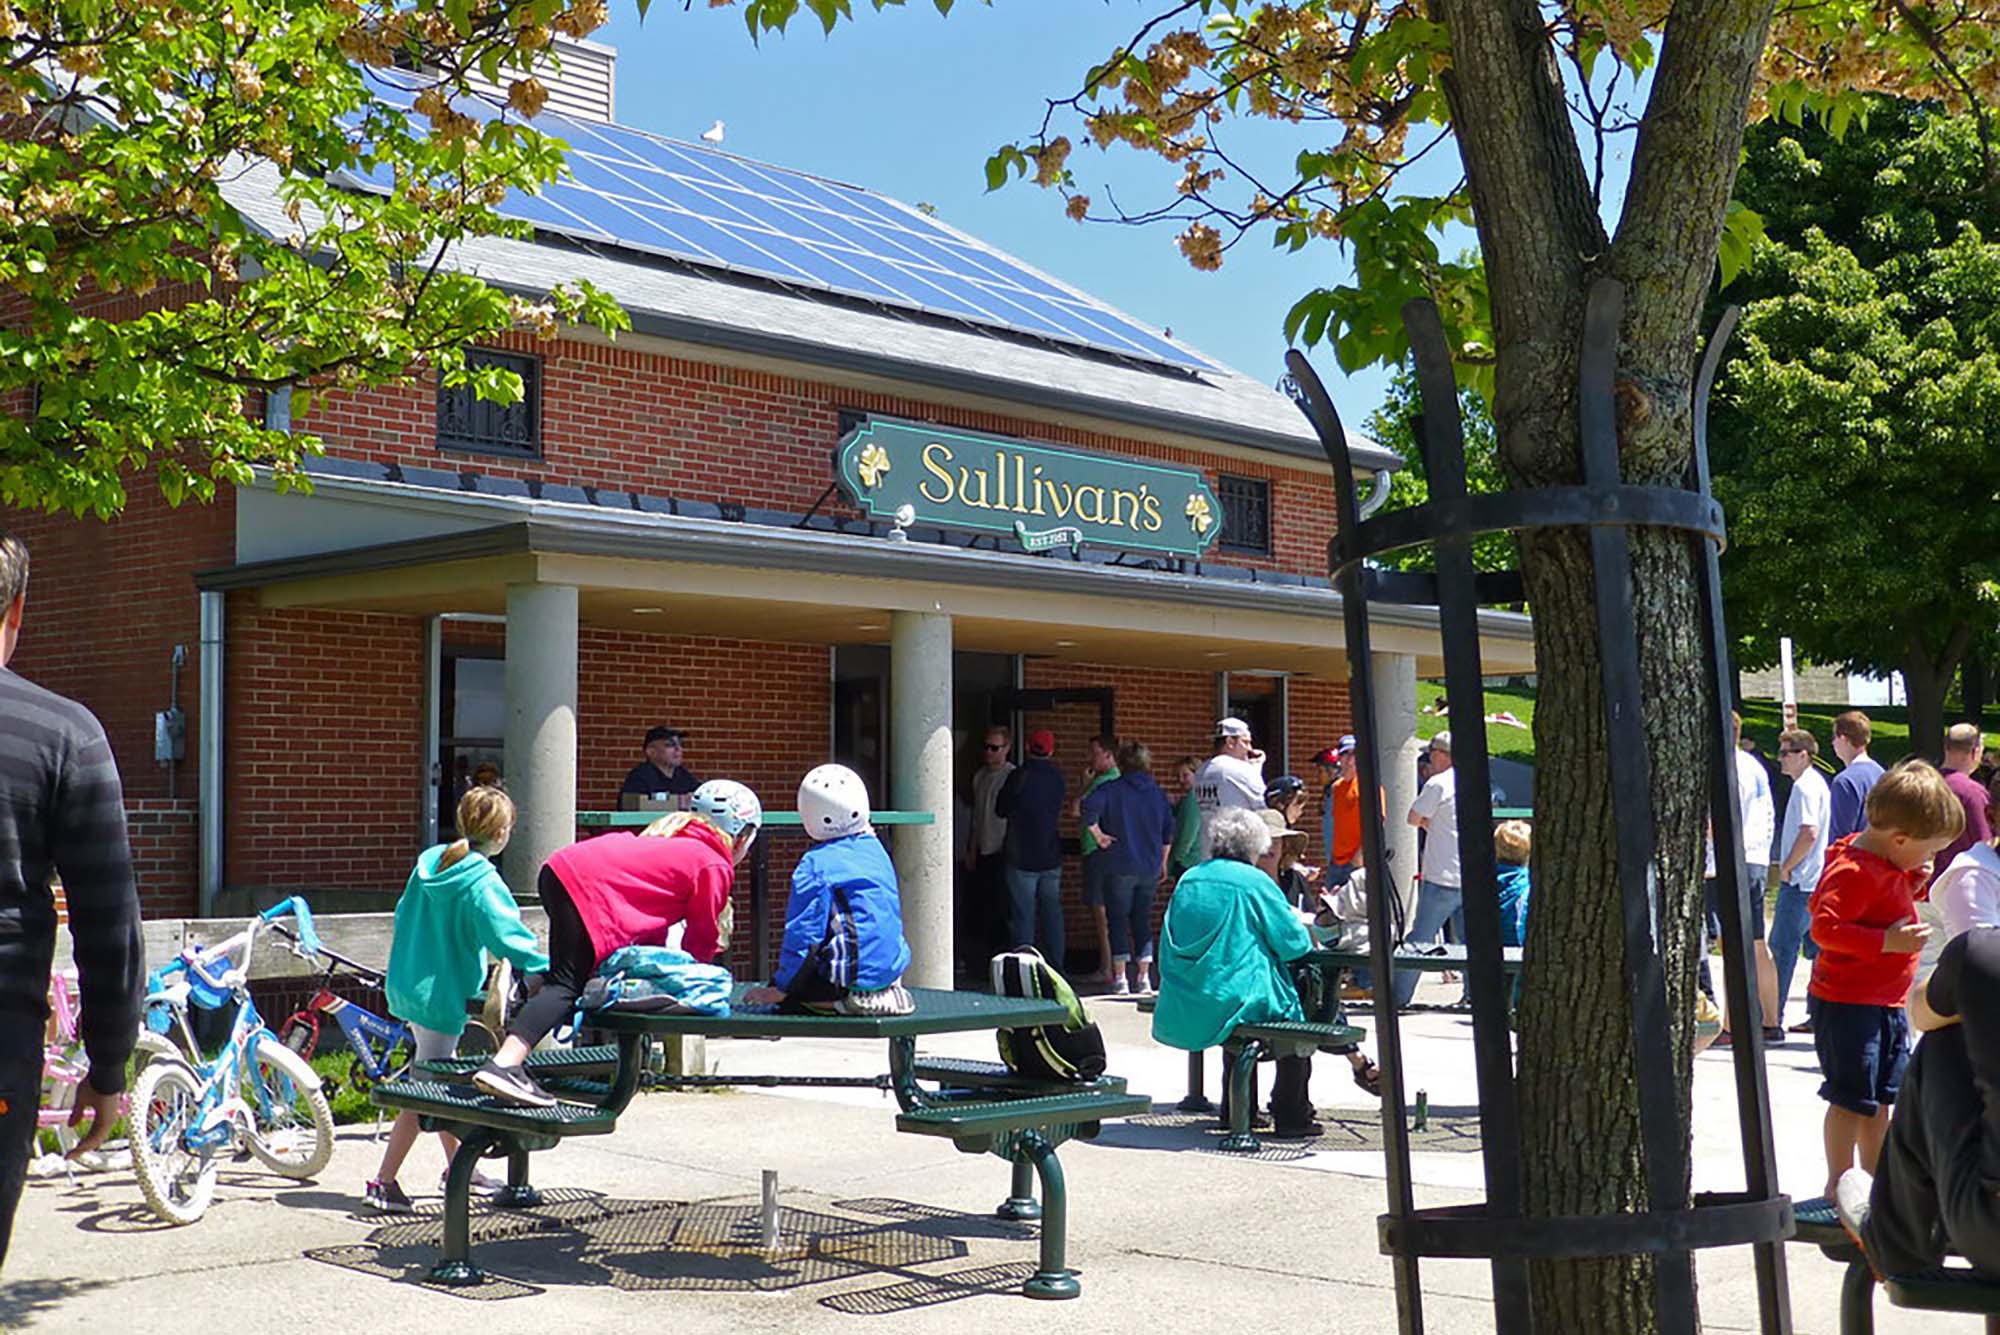 Photo of people gathered in font of a building with a large green sign that reads "Sullivan's". The sit and stand on and around dark green tables on a sunny day.